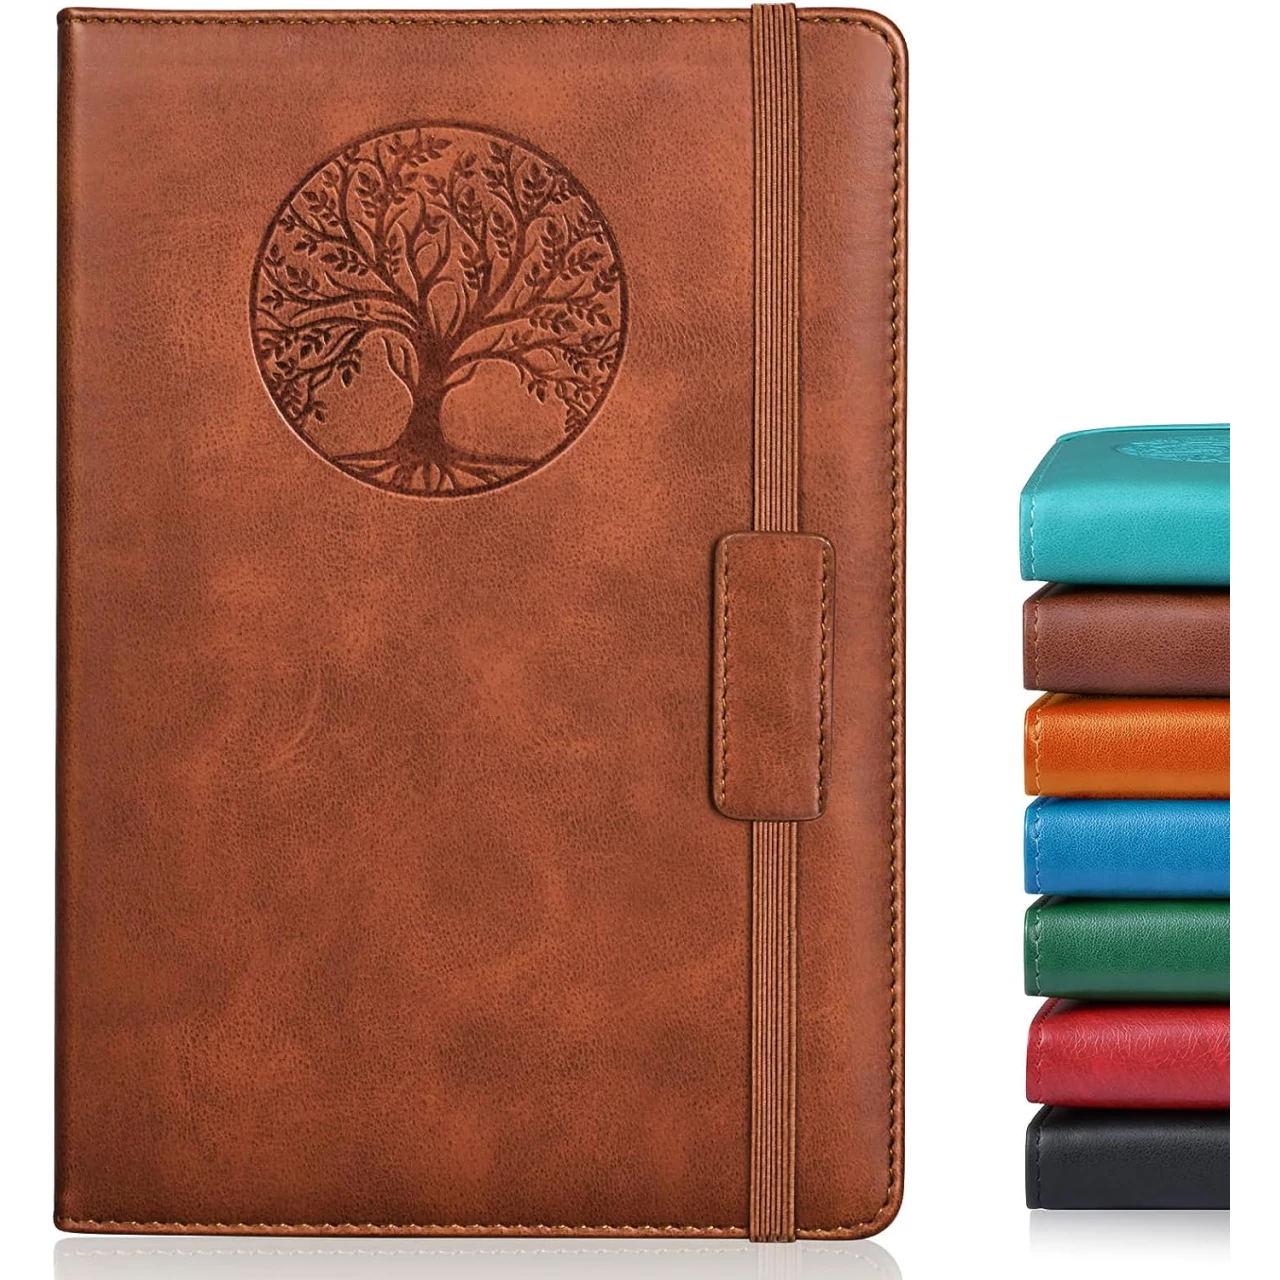 Hardcover Leather Lined Journal Notebook